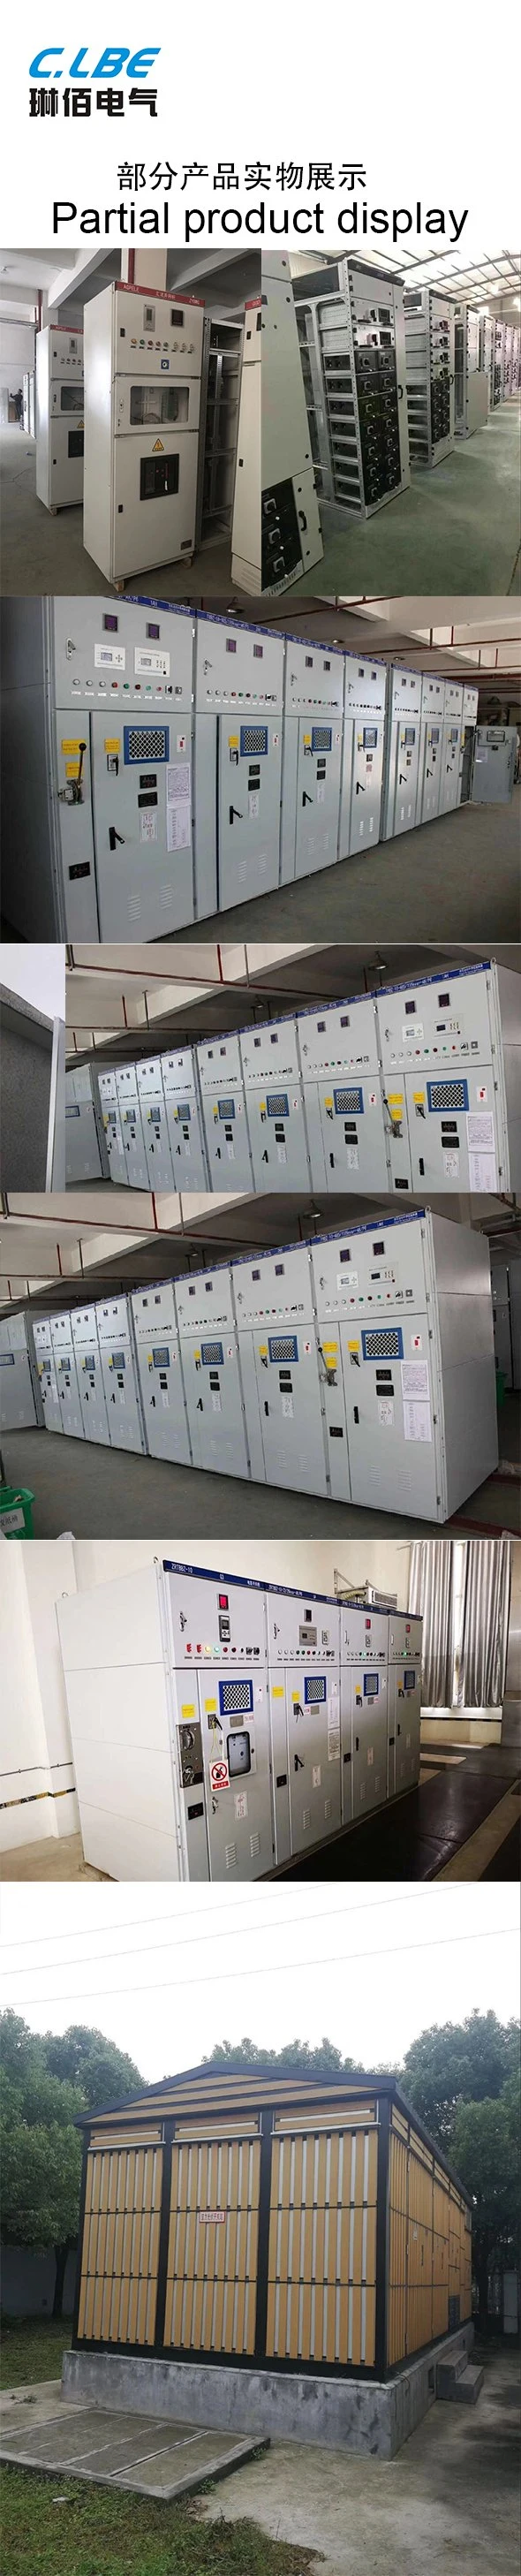 Substation, Prefabricated Substation, Combined Substation Power Distribution